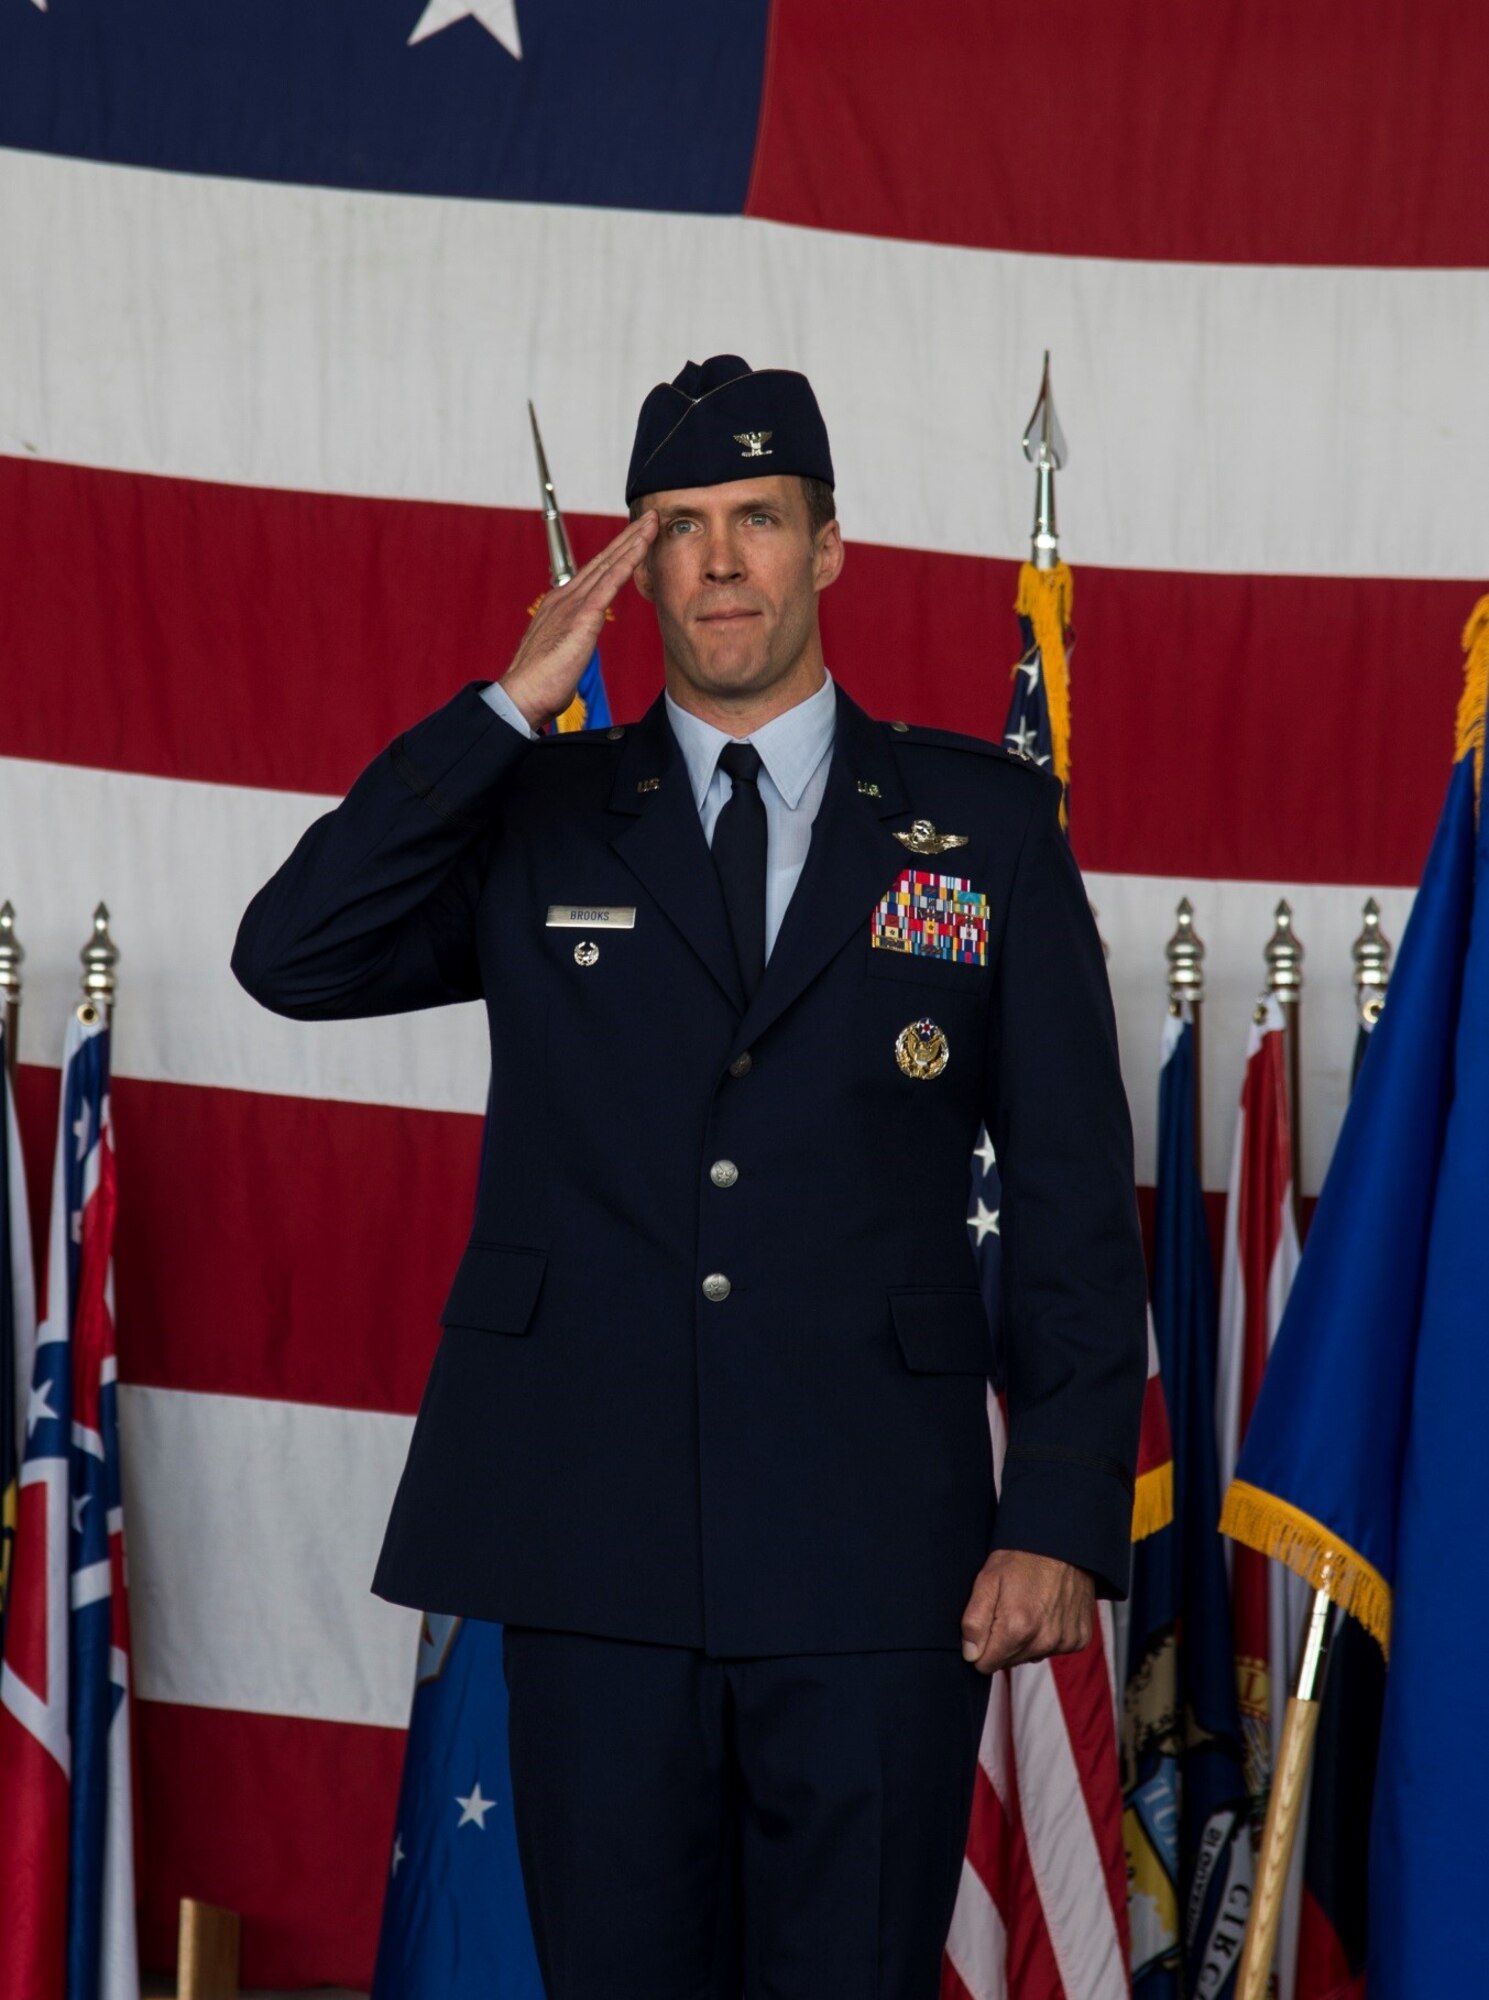 Col. Matthew Brooks gives his first salute as 5th Bomb Wing commander during the 5th BW change of command ceremony at Minot Air Force Base, N.D., June 3, 2016. Brooks came from Whiteman Air Force Base’s 509th Bomb Wing as the vice wing commander. (U.S. Air Force photo/Airman 1st Class Christian Sullivan)